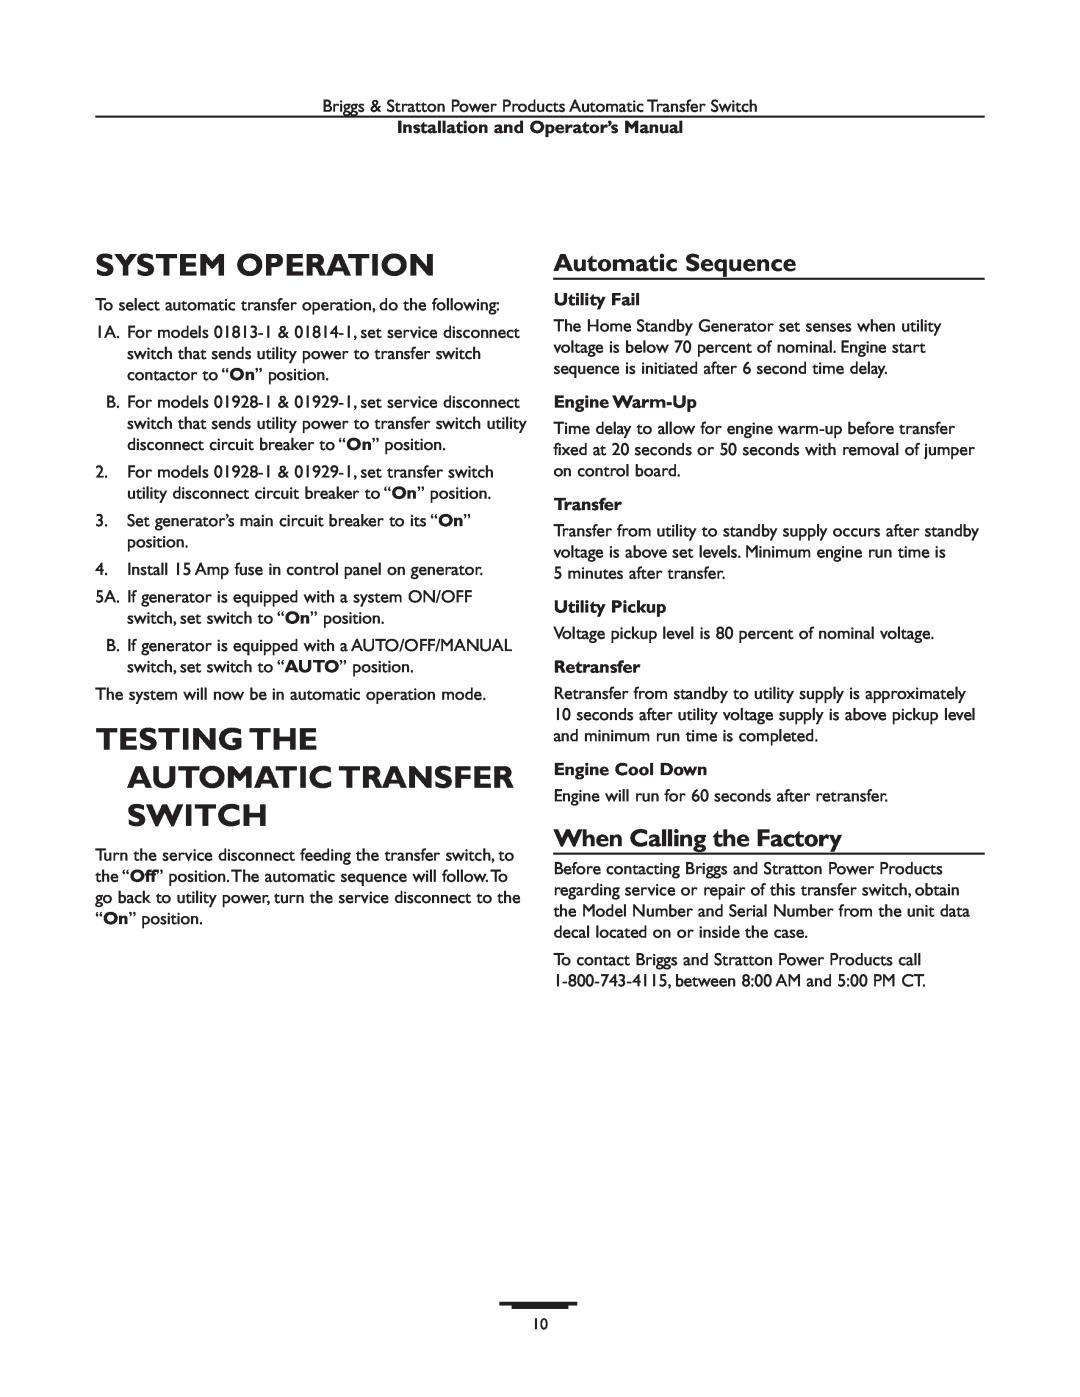 Briggs & Stratton 01929-1 manual System Operation, Testing The Automatic Transfer Switch, Automatic Sequence, Utility Fail 